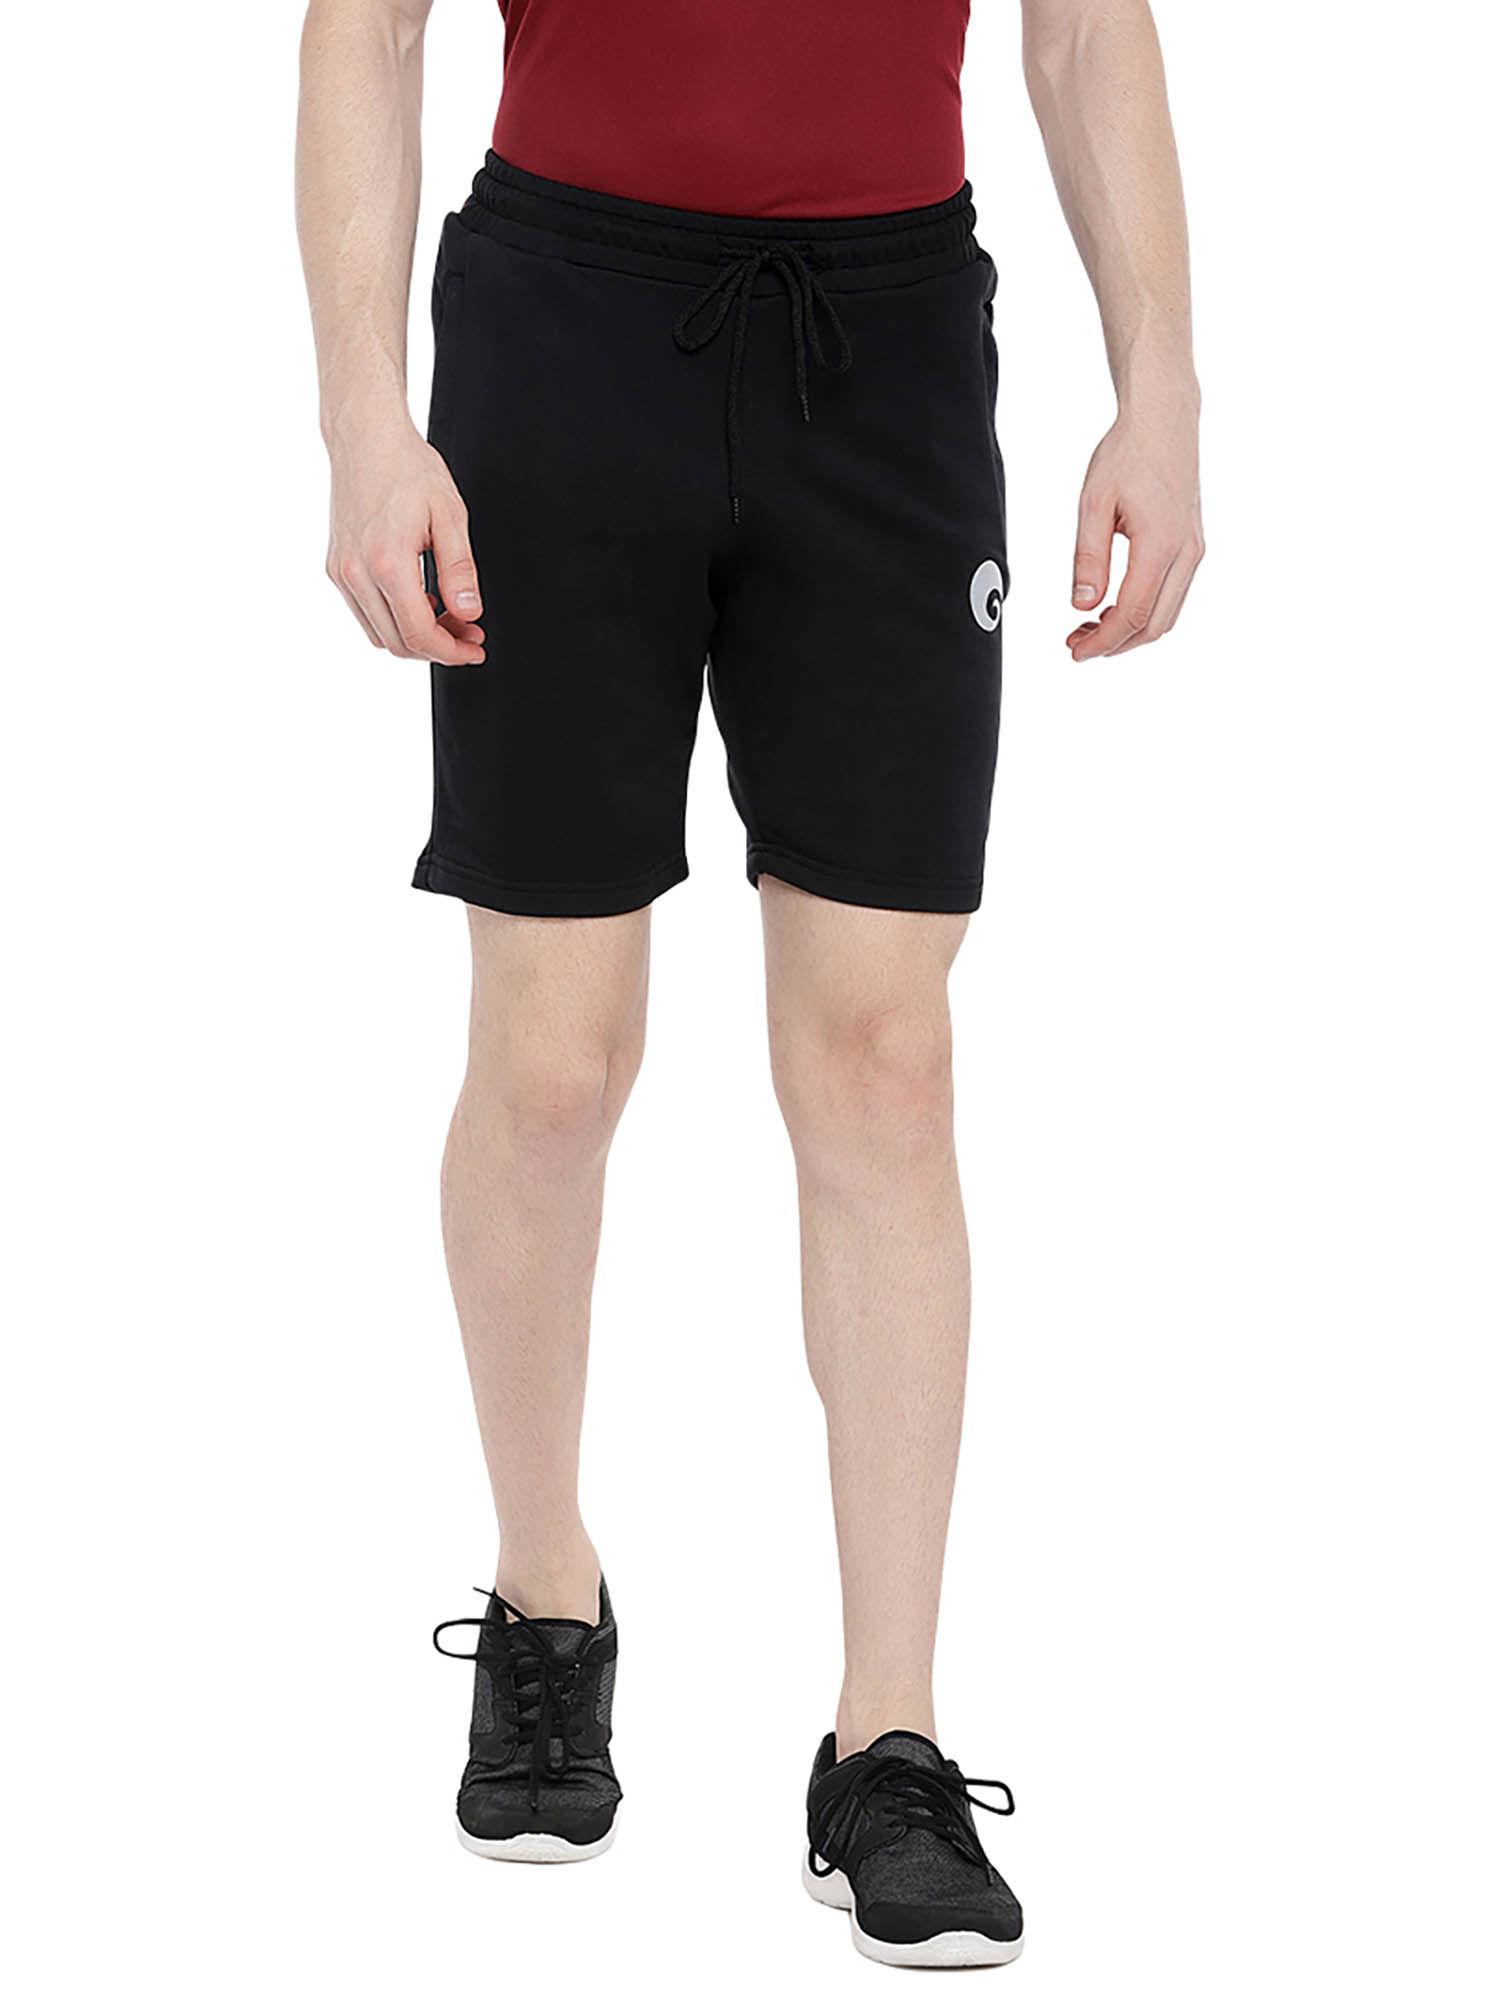 casualport shorts with 4 waystretch for extreme comfort foren - black